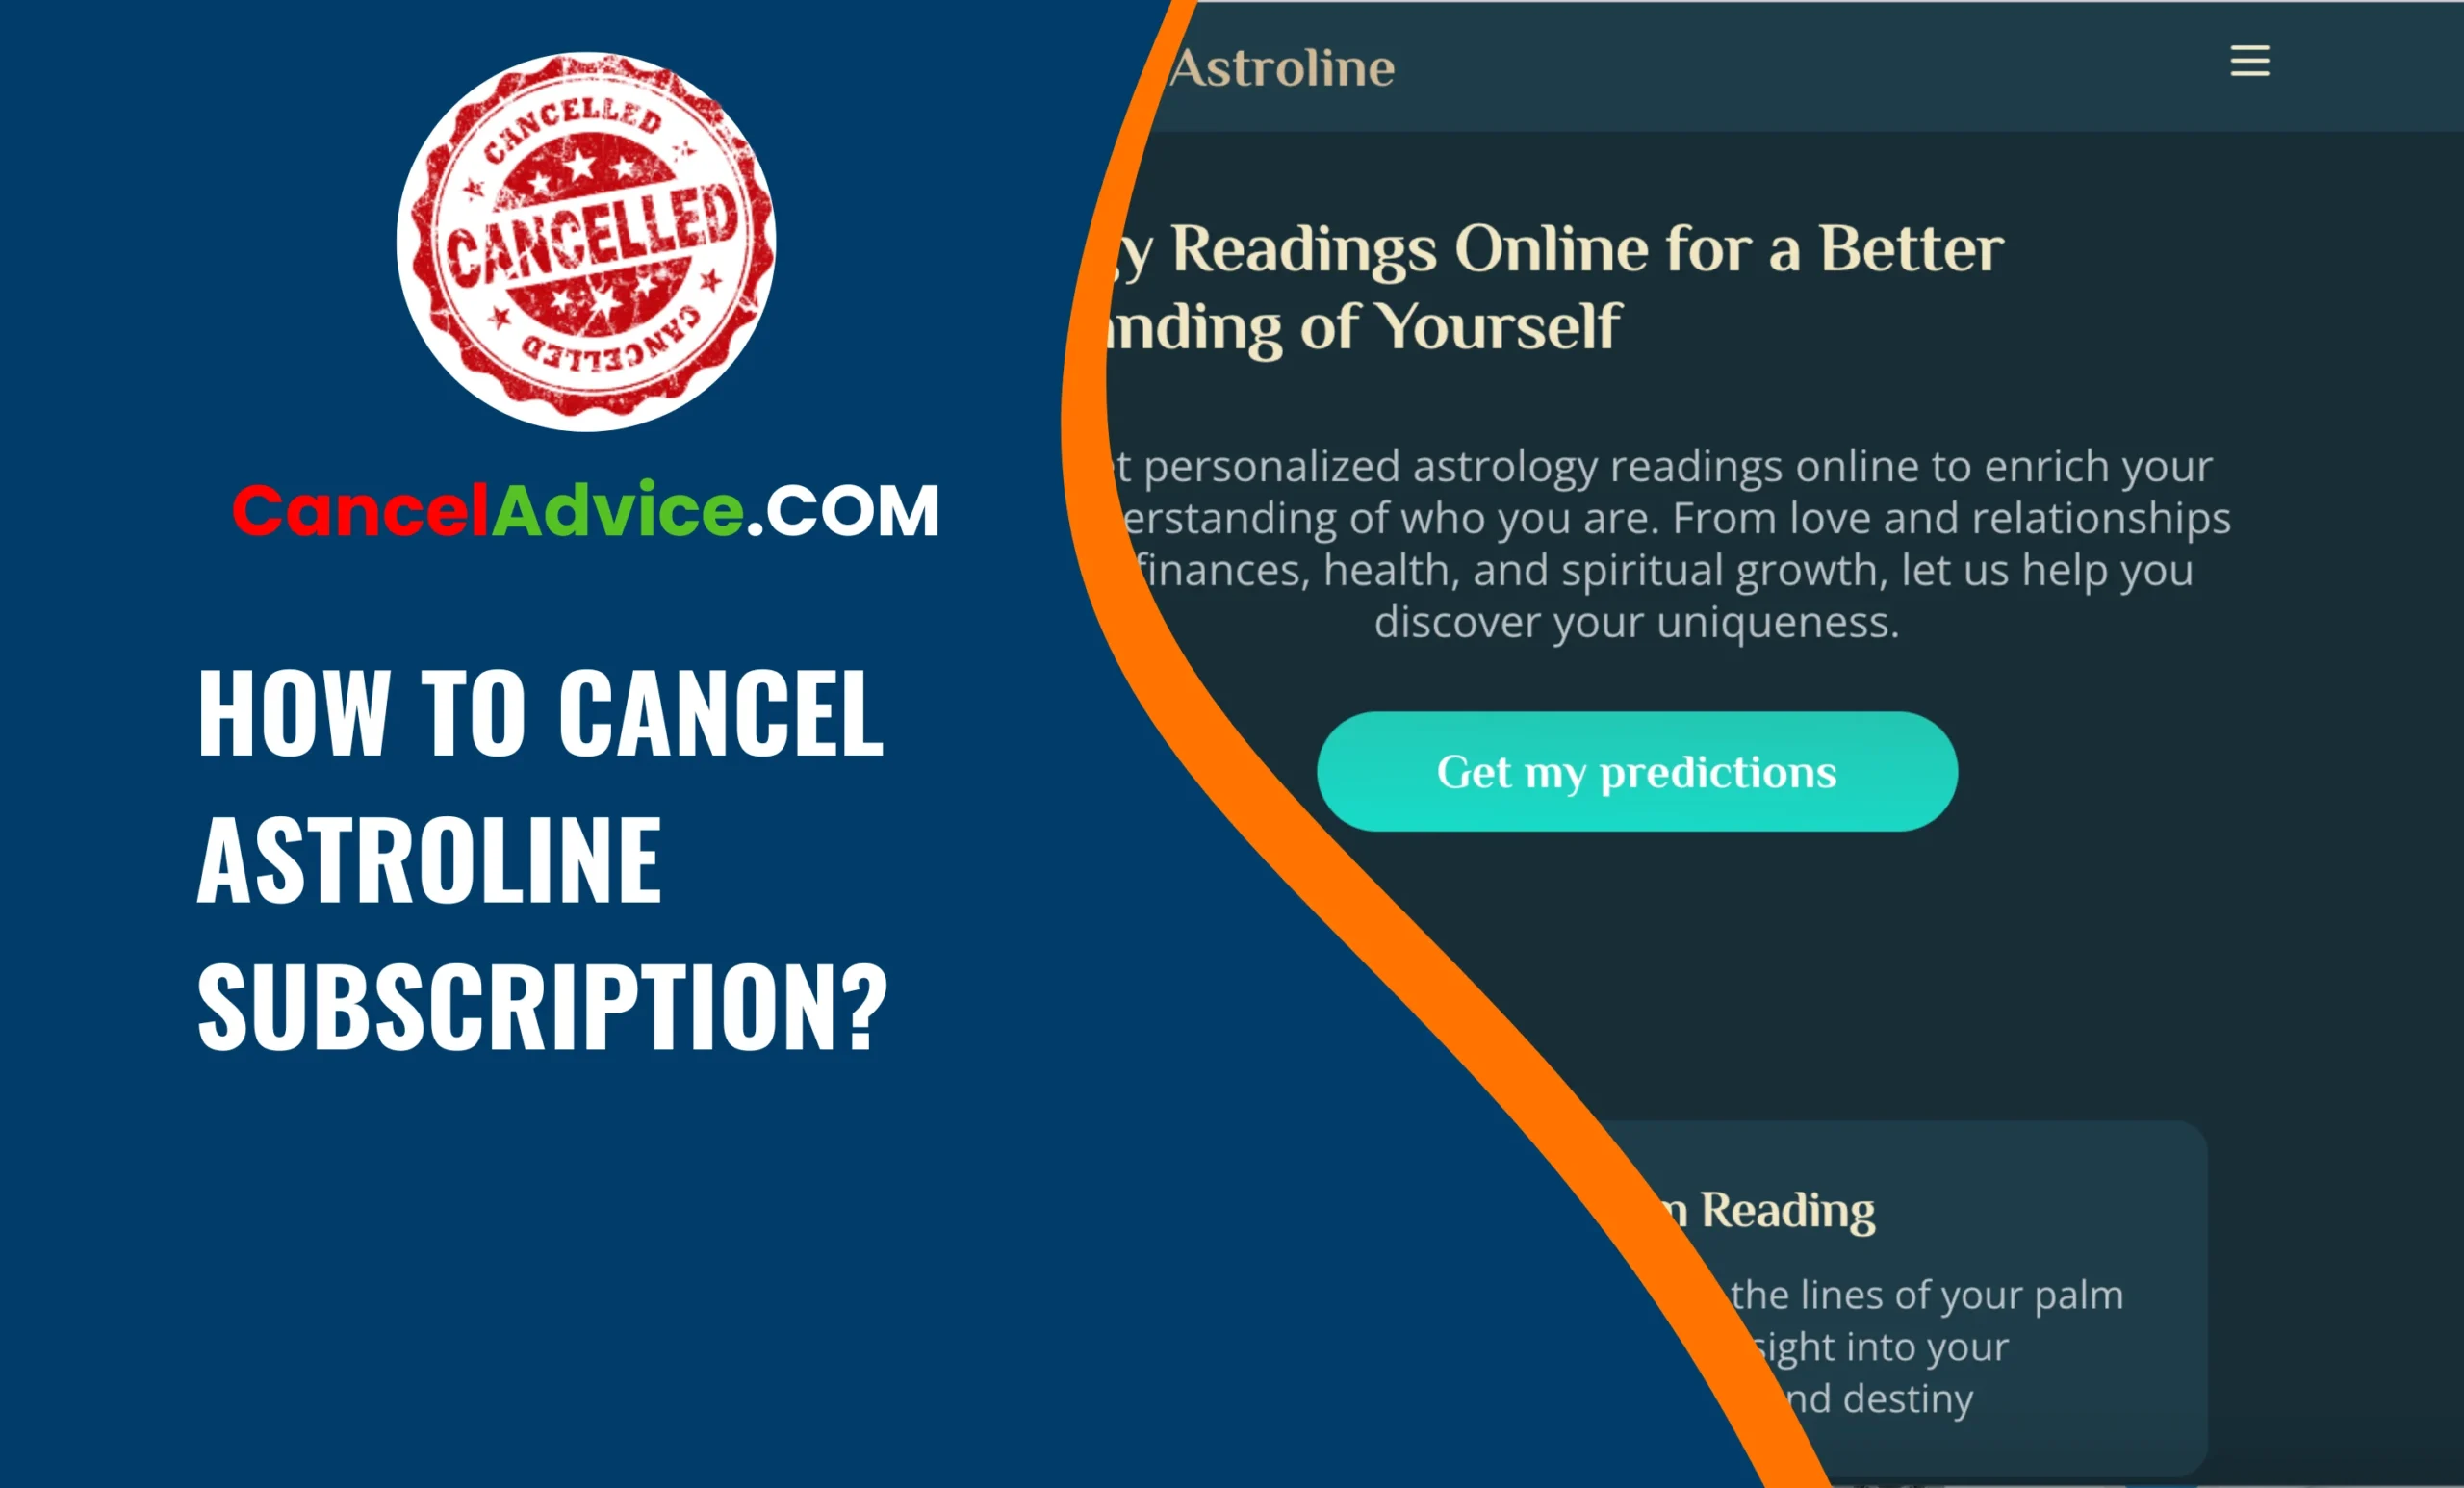 How to Cancel Astroline Subscription